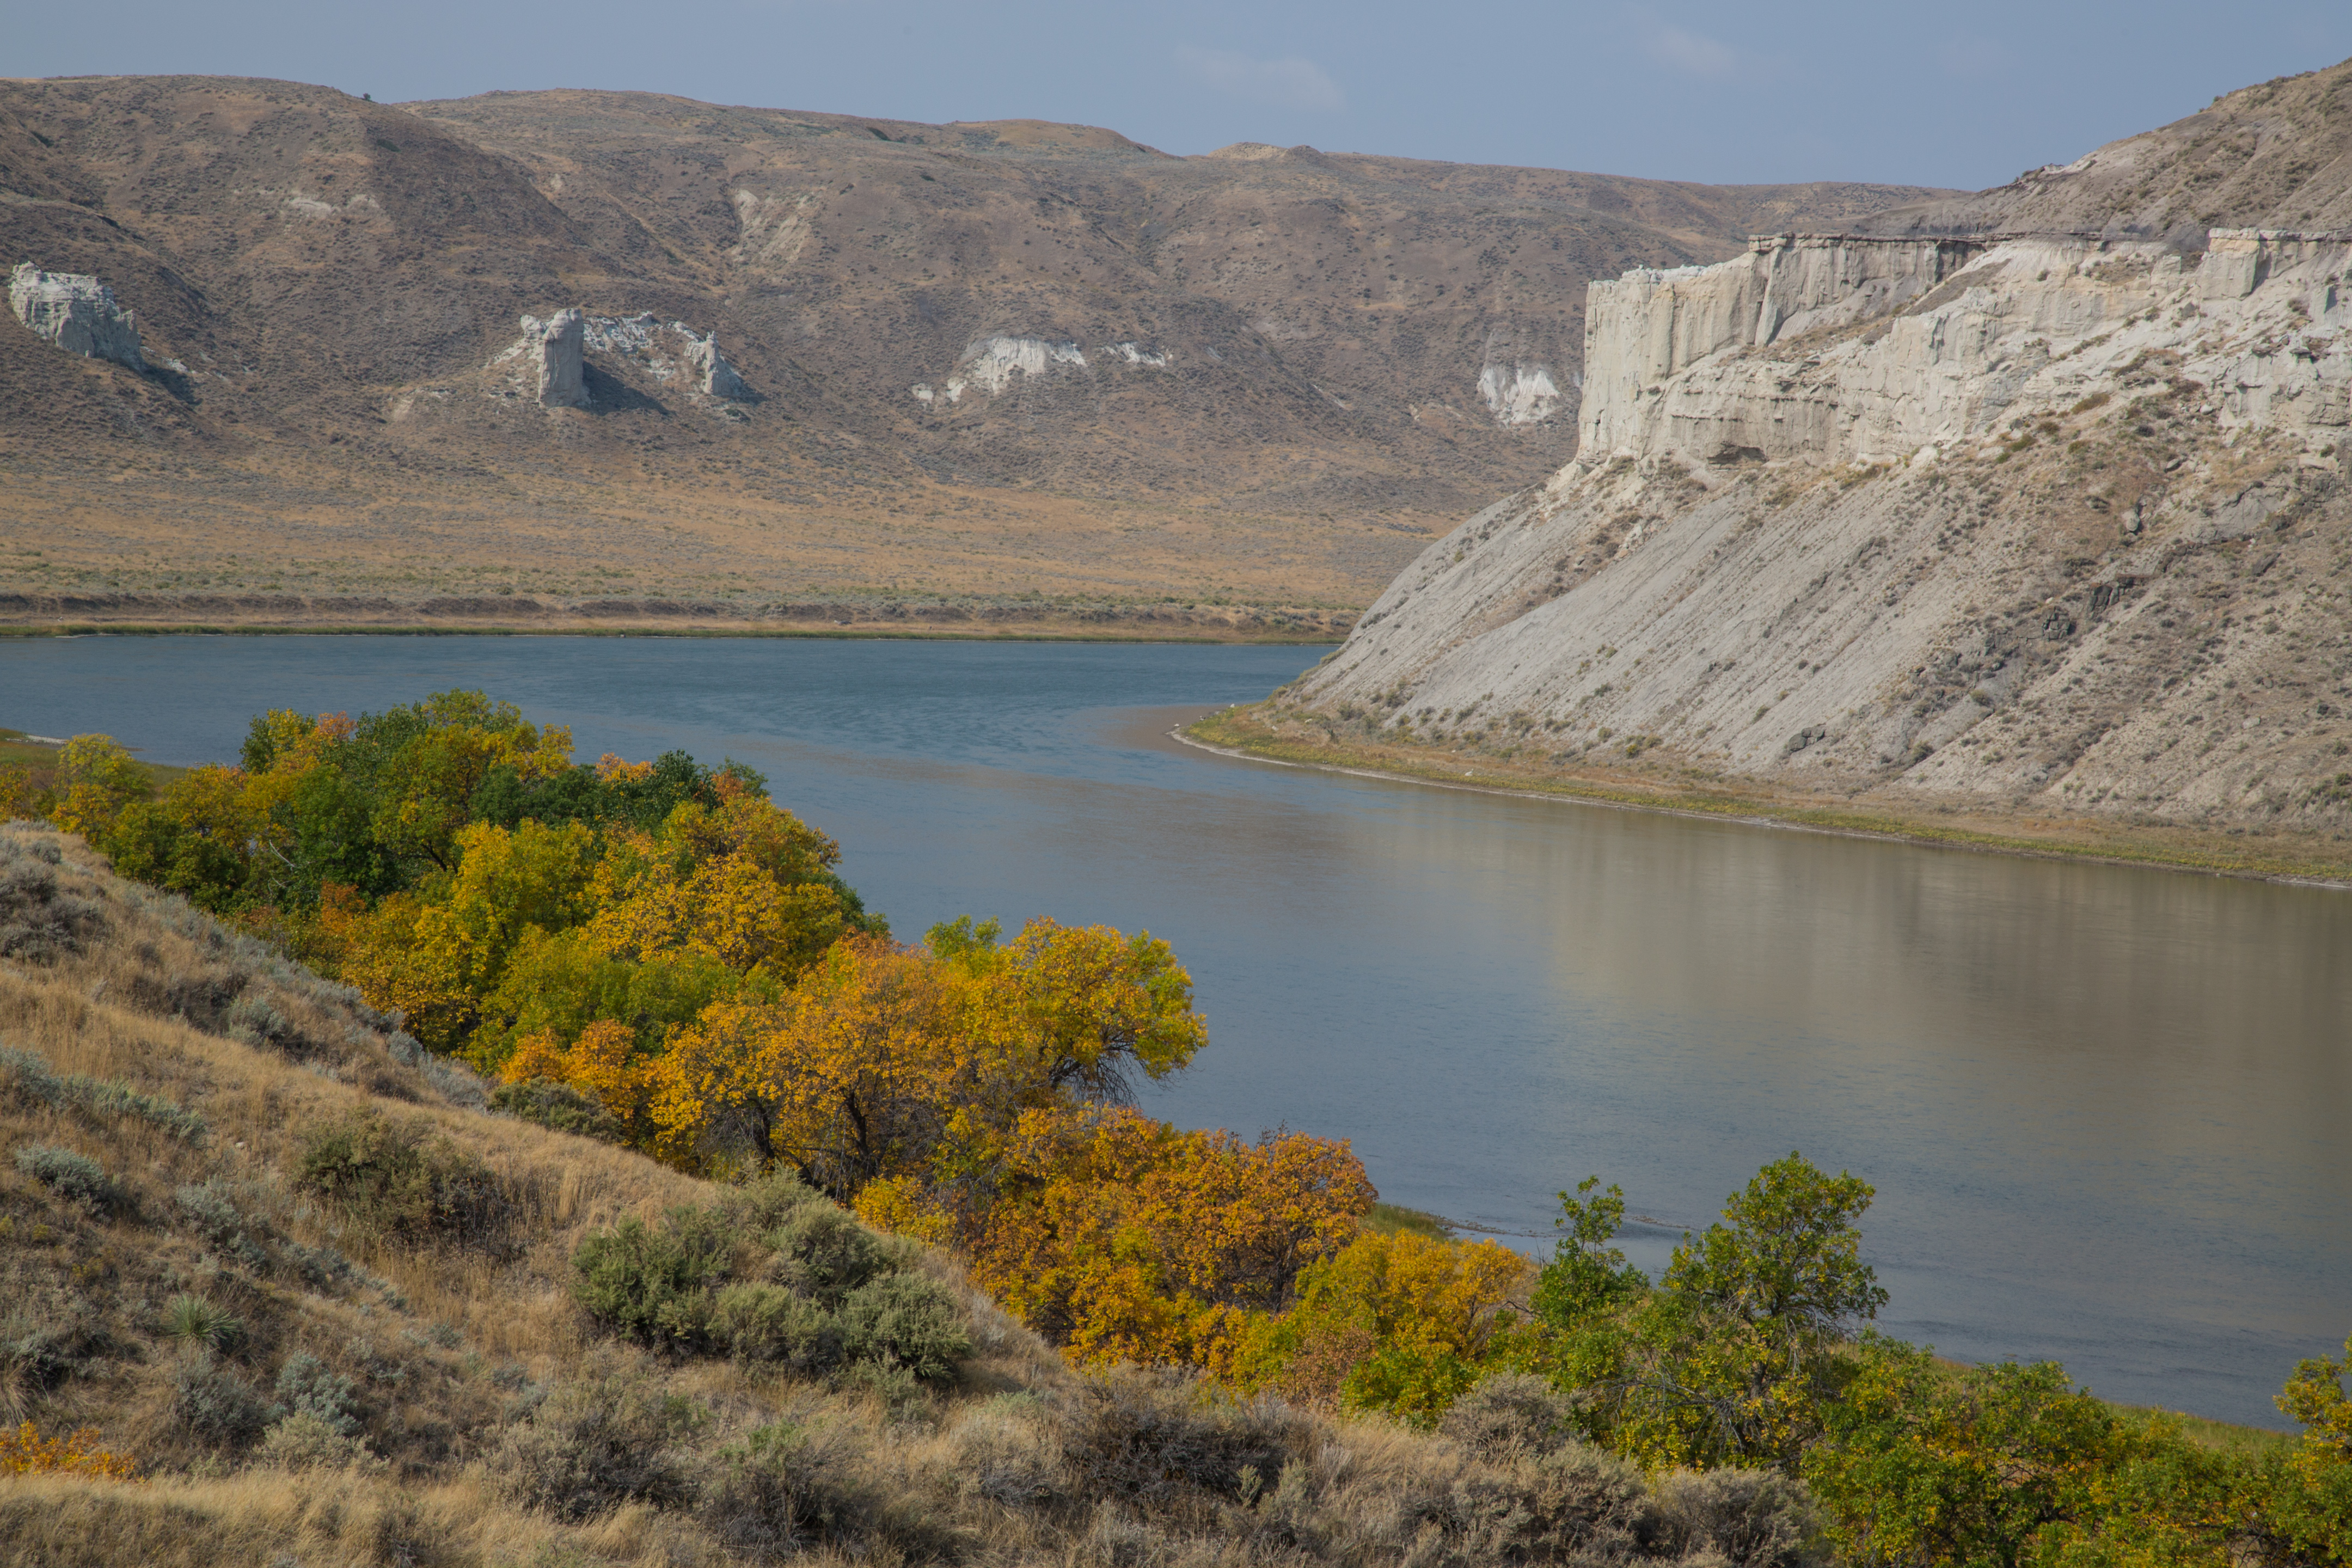 A view of the Missouri river flowing through the white cliffs of the national monument with fall foliage surrounding the scene.